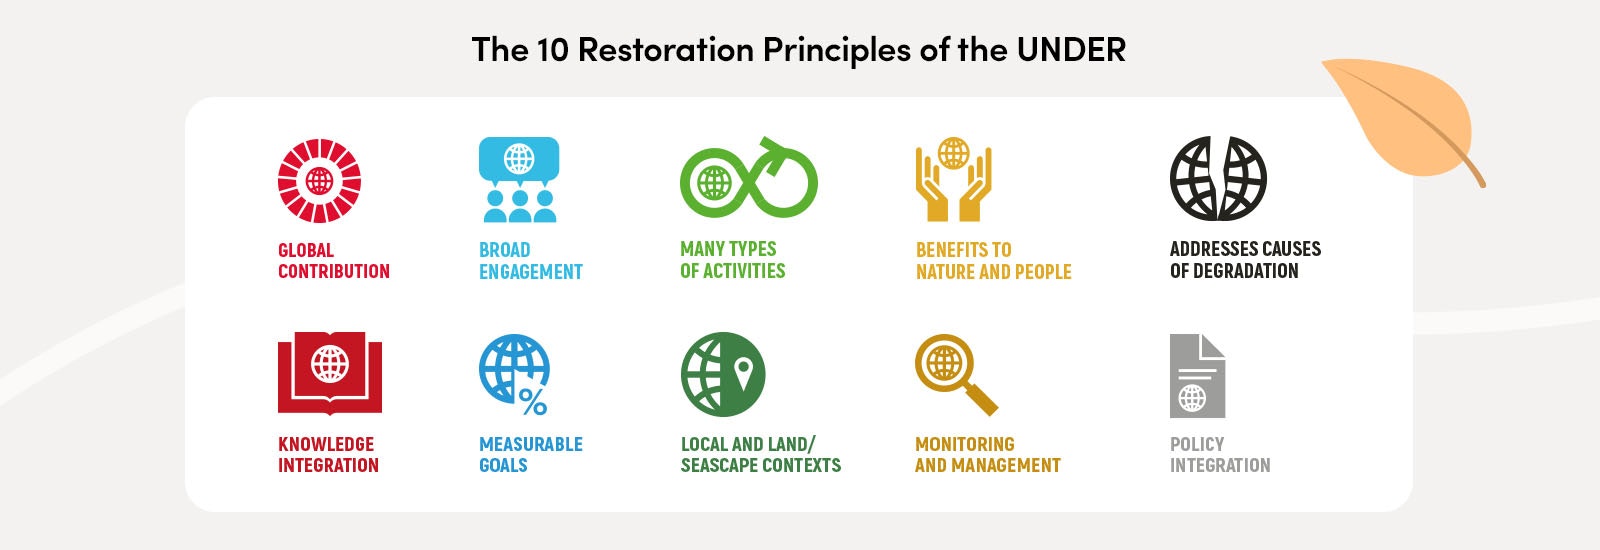 The 10 Restoration Principles of the UNDER